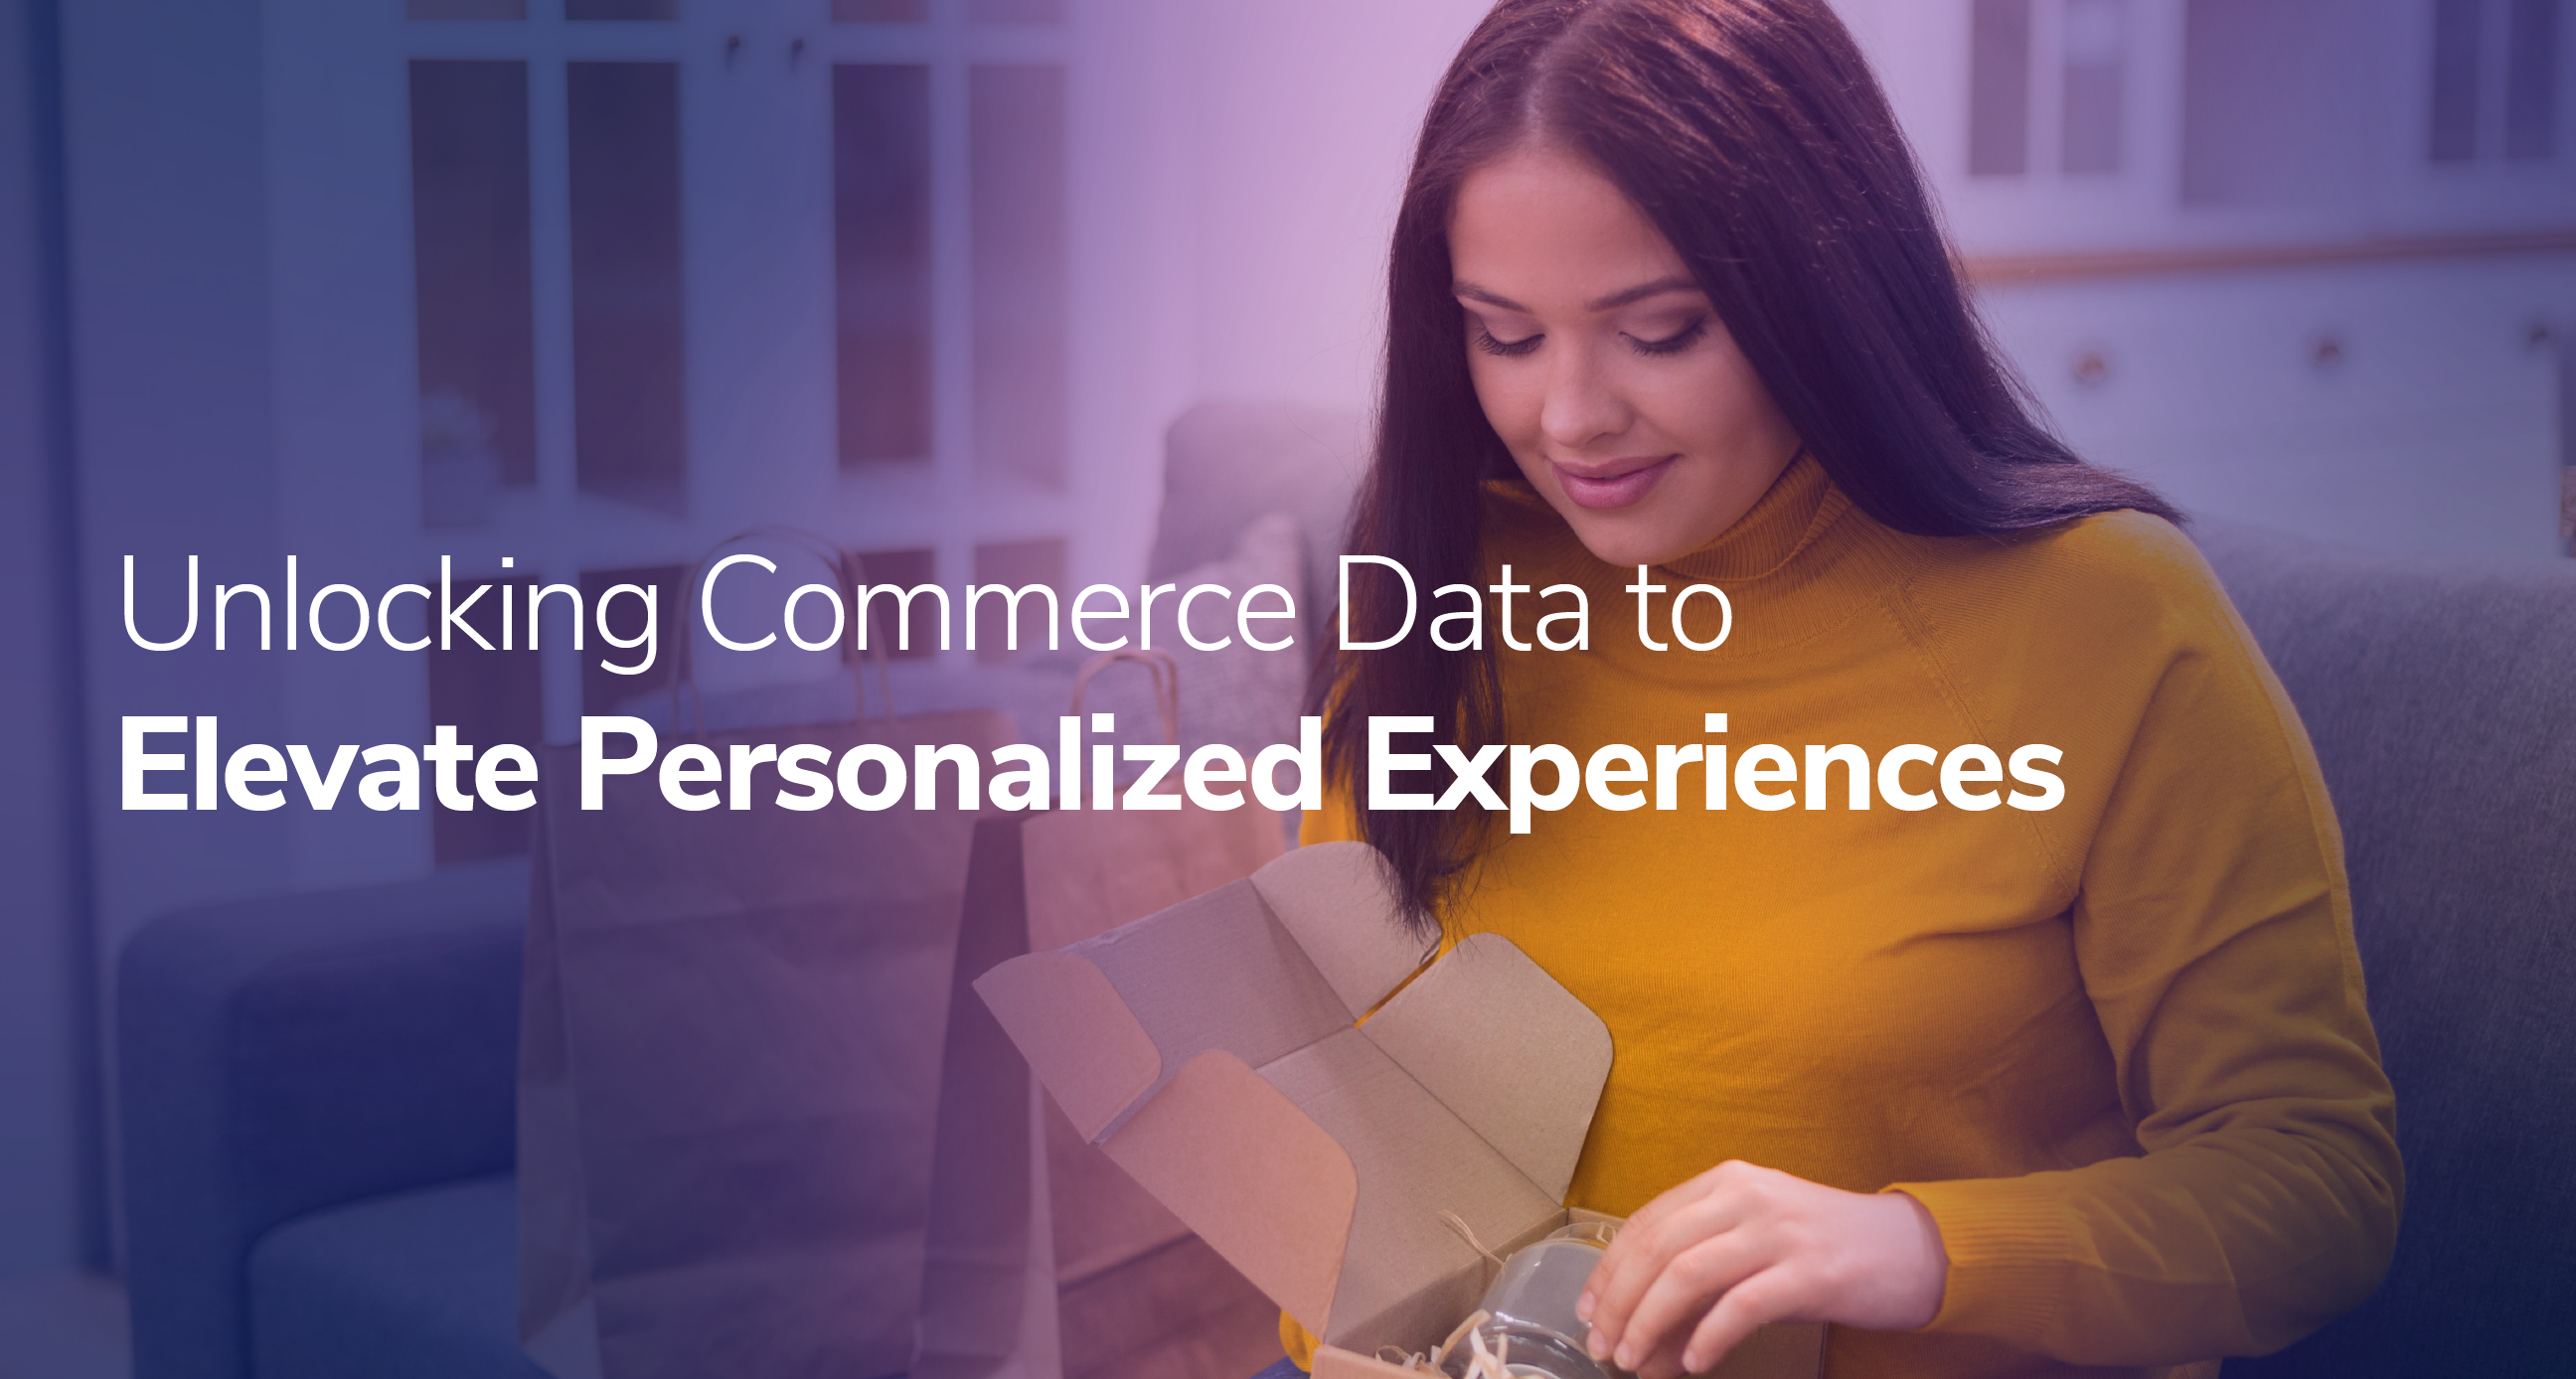 Unlock Commerce Data to Elevate Personalized Experiences